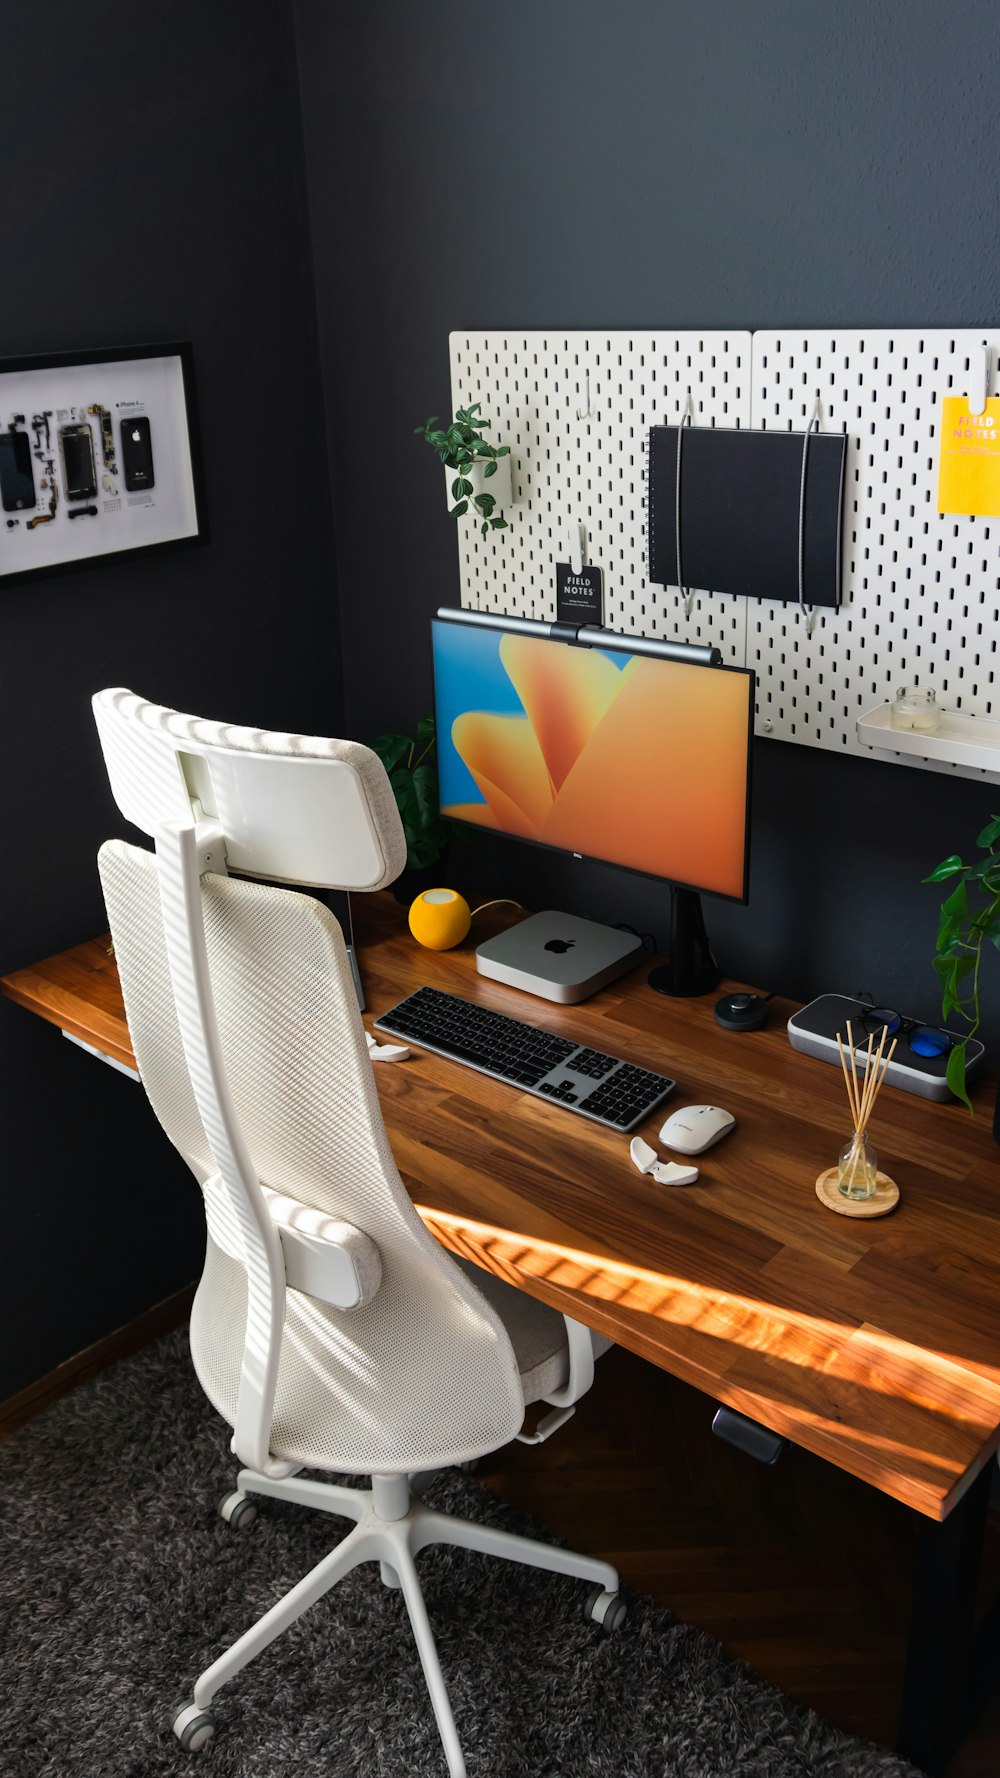 a desk with a computer monitor and keyboard on it